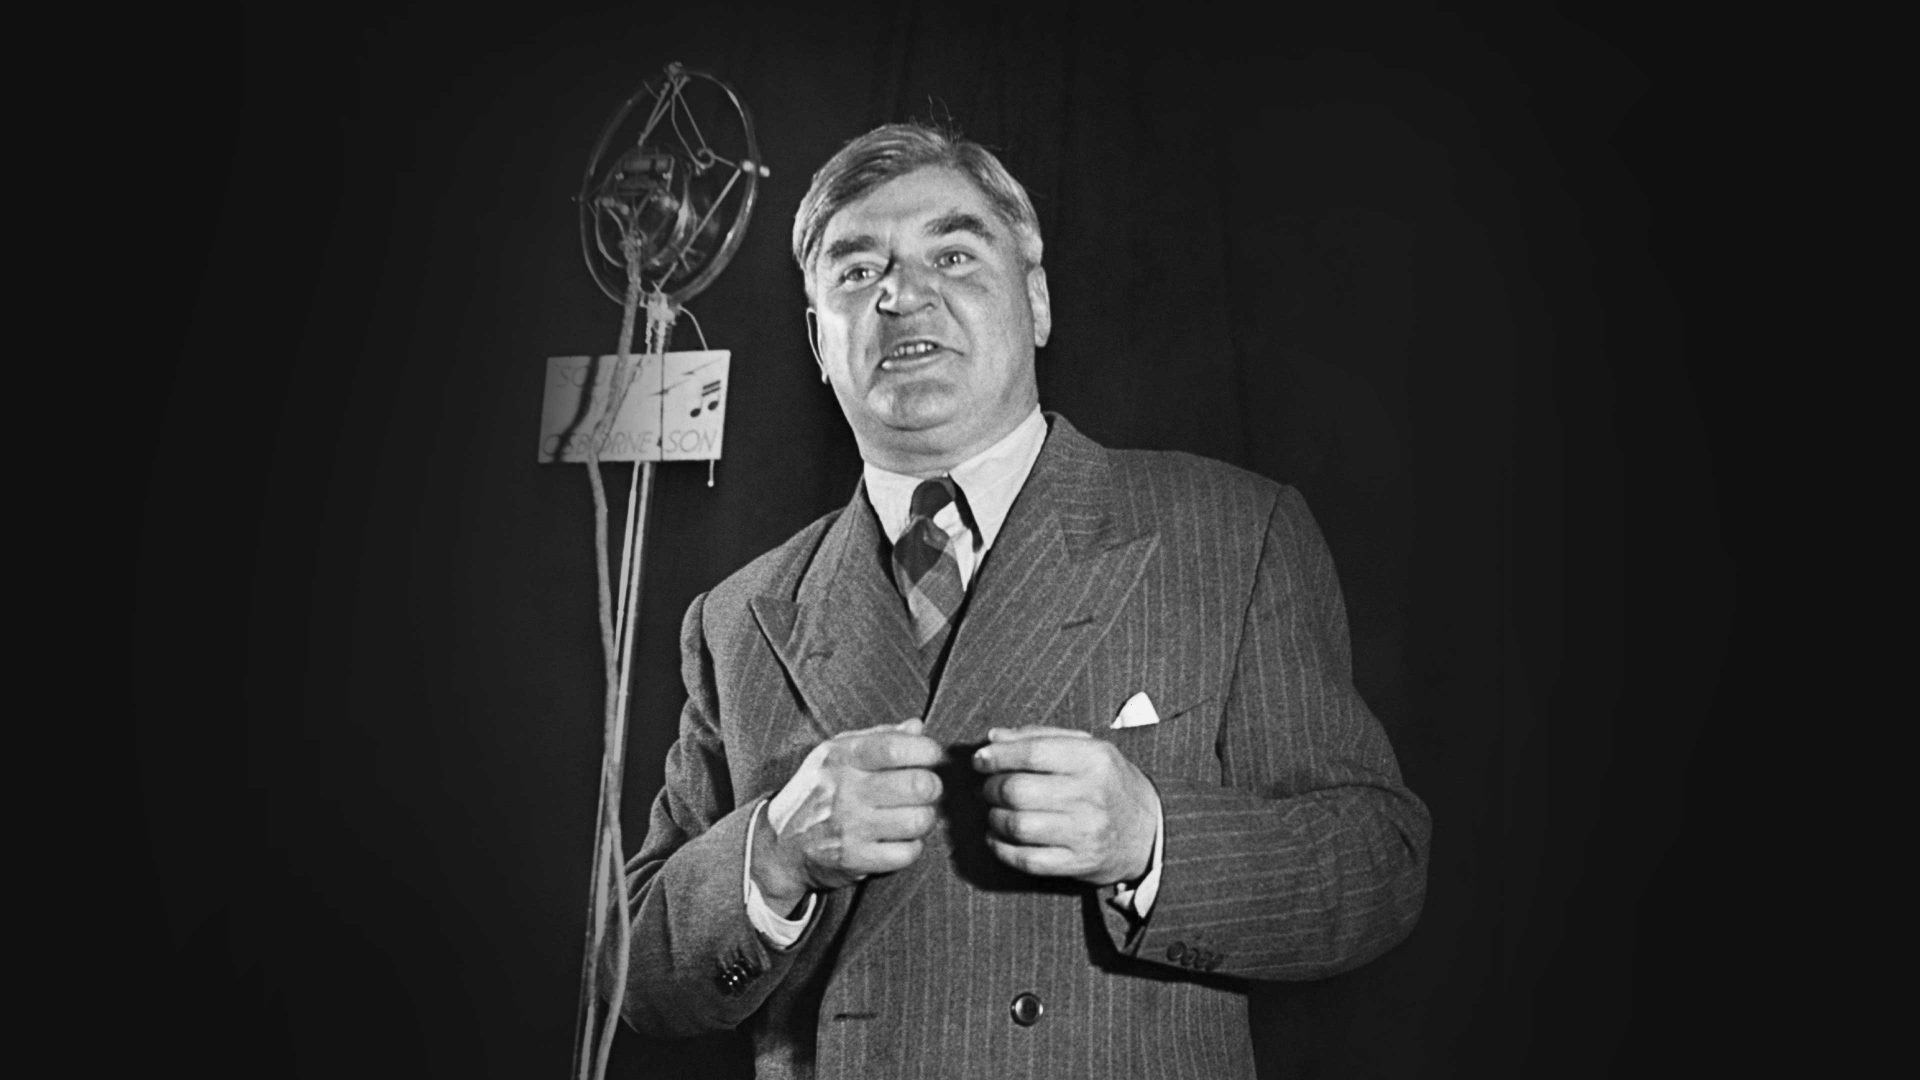 Nye Bevan, British politician and orator, at Cwm, Wales, making speech in bid for re-election. Photo: Getty Images